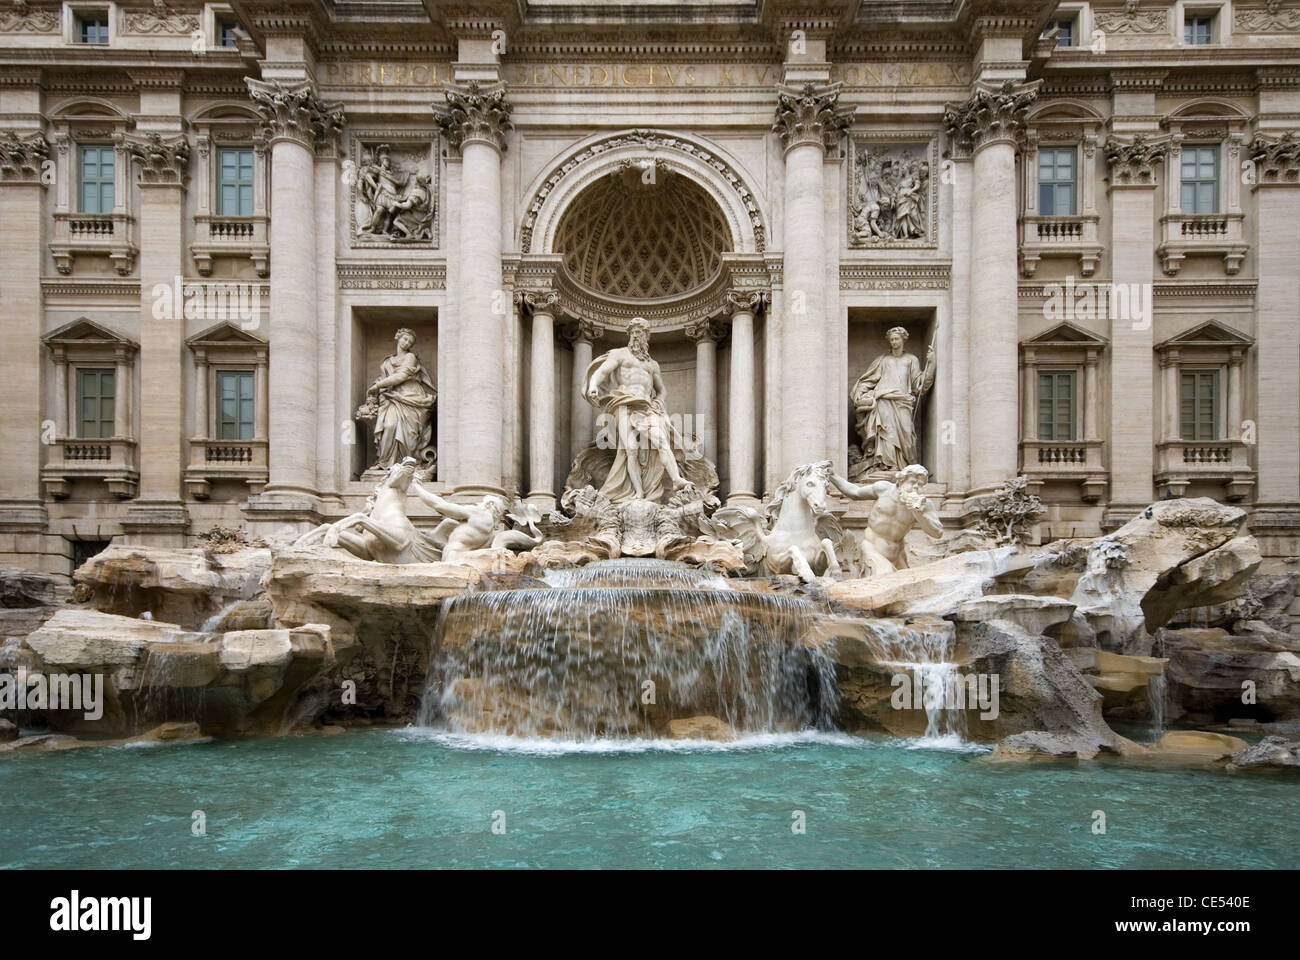 The Trevi Fountain, situated in the Trevi district in Rome, Italy, has become one of the most famous fountains in the world Stock Photo